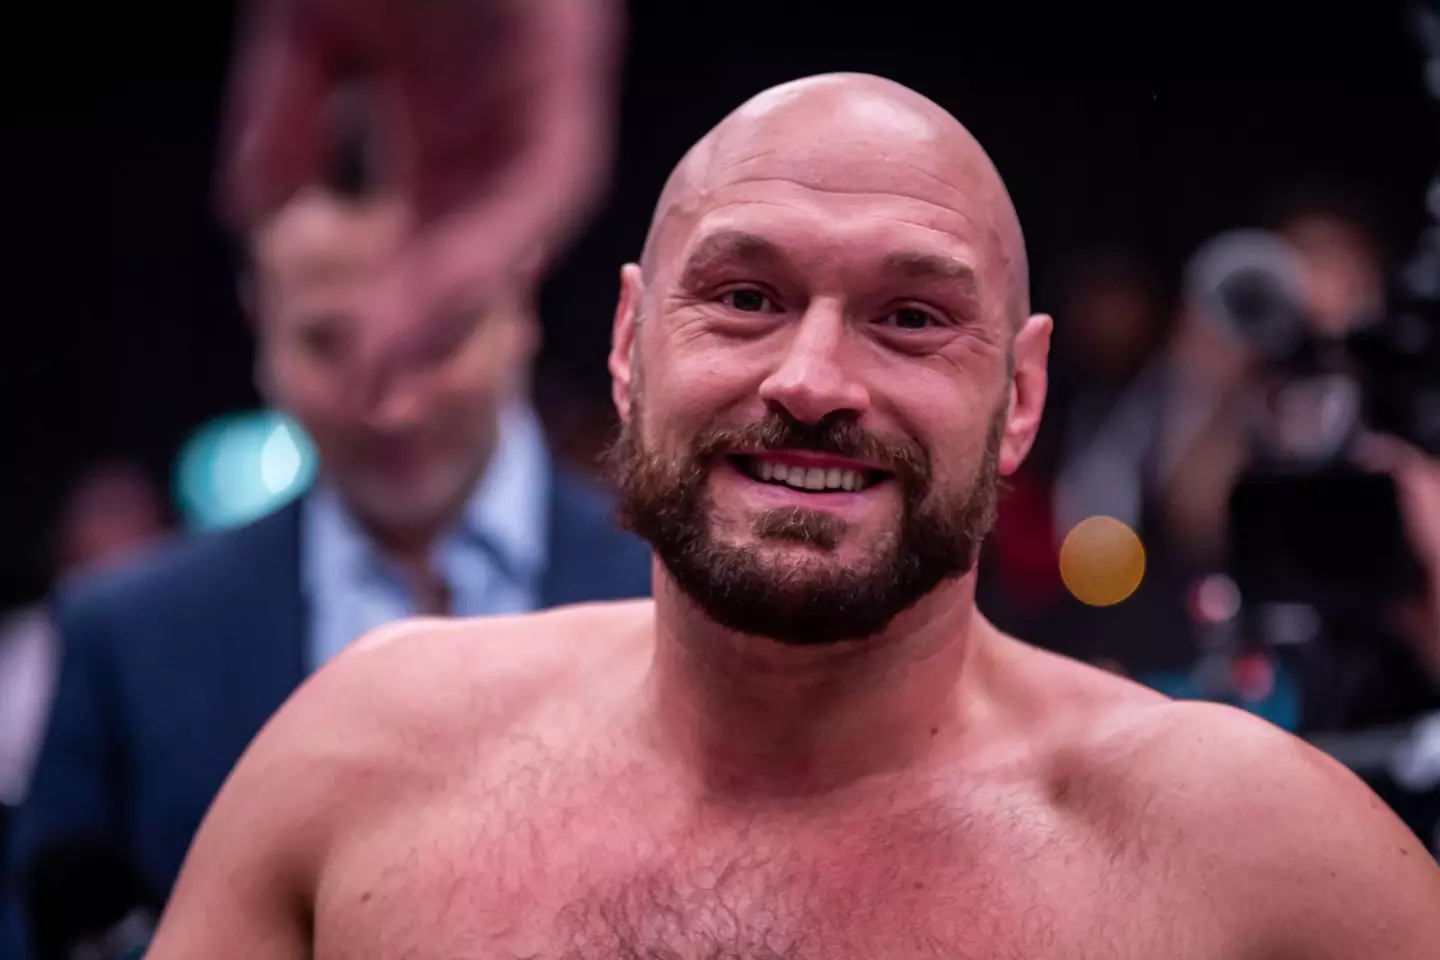 The beef started when Tyson Fury challenged Paul to fight his brother in a tweet.